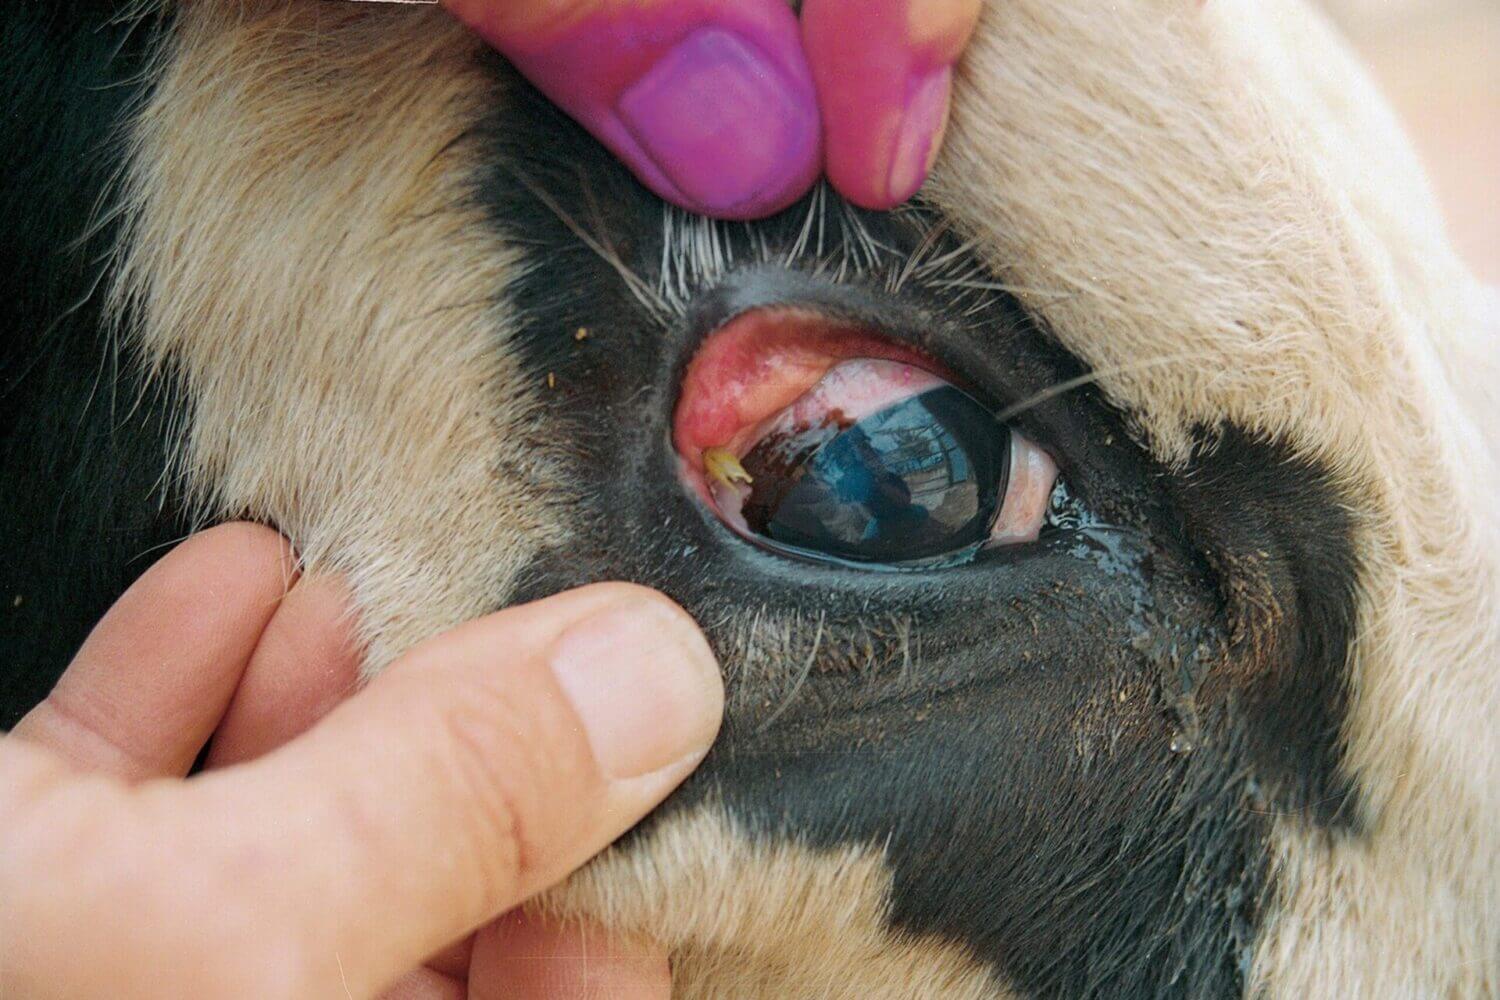 This image shows Pinkeye caused by physical irritation from a sharp grass seed. Image Credit: Local Land Services.